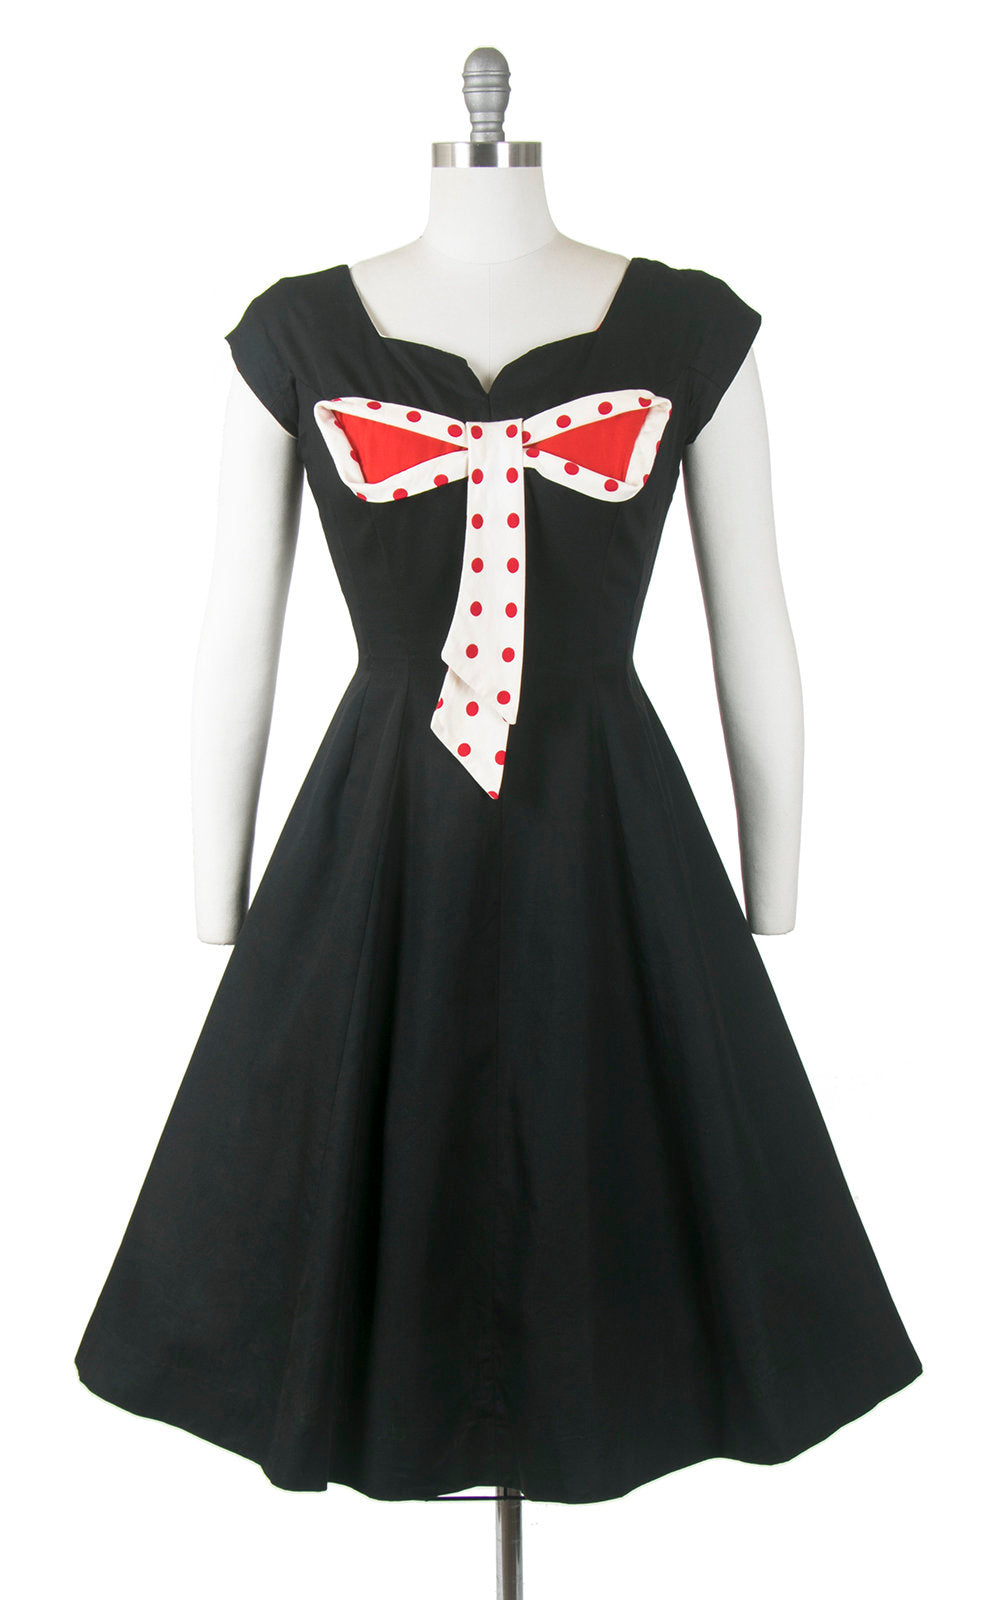 Vintage 1950s Dress | 50s MISS ELLIETTE Polka Dot Bow Cotton Black Red Full Skirt Holiday Party Day Dress (small)